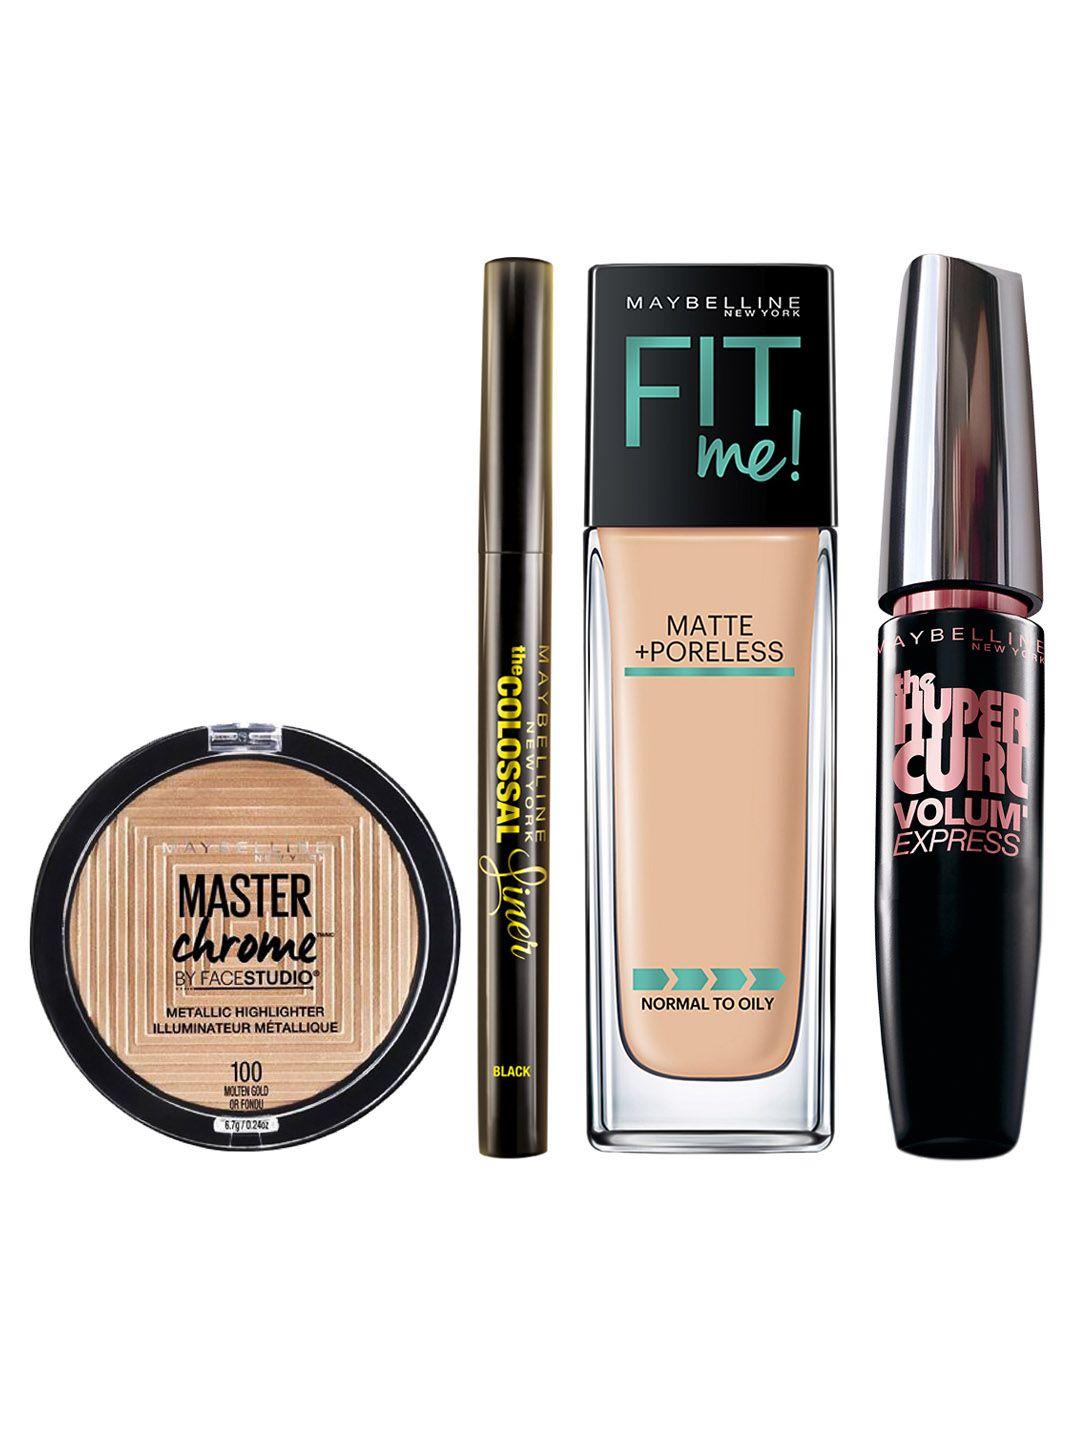 maybelline new york set of highlighter & liner with mascara & foundation